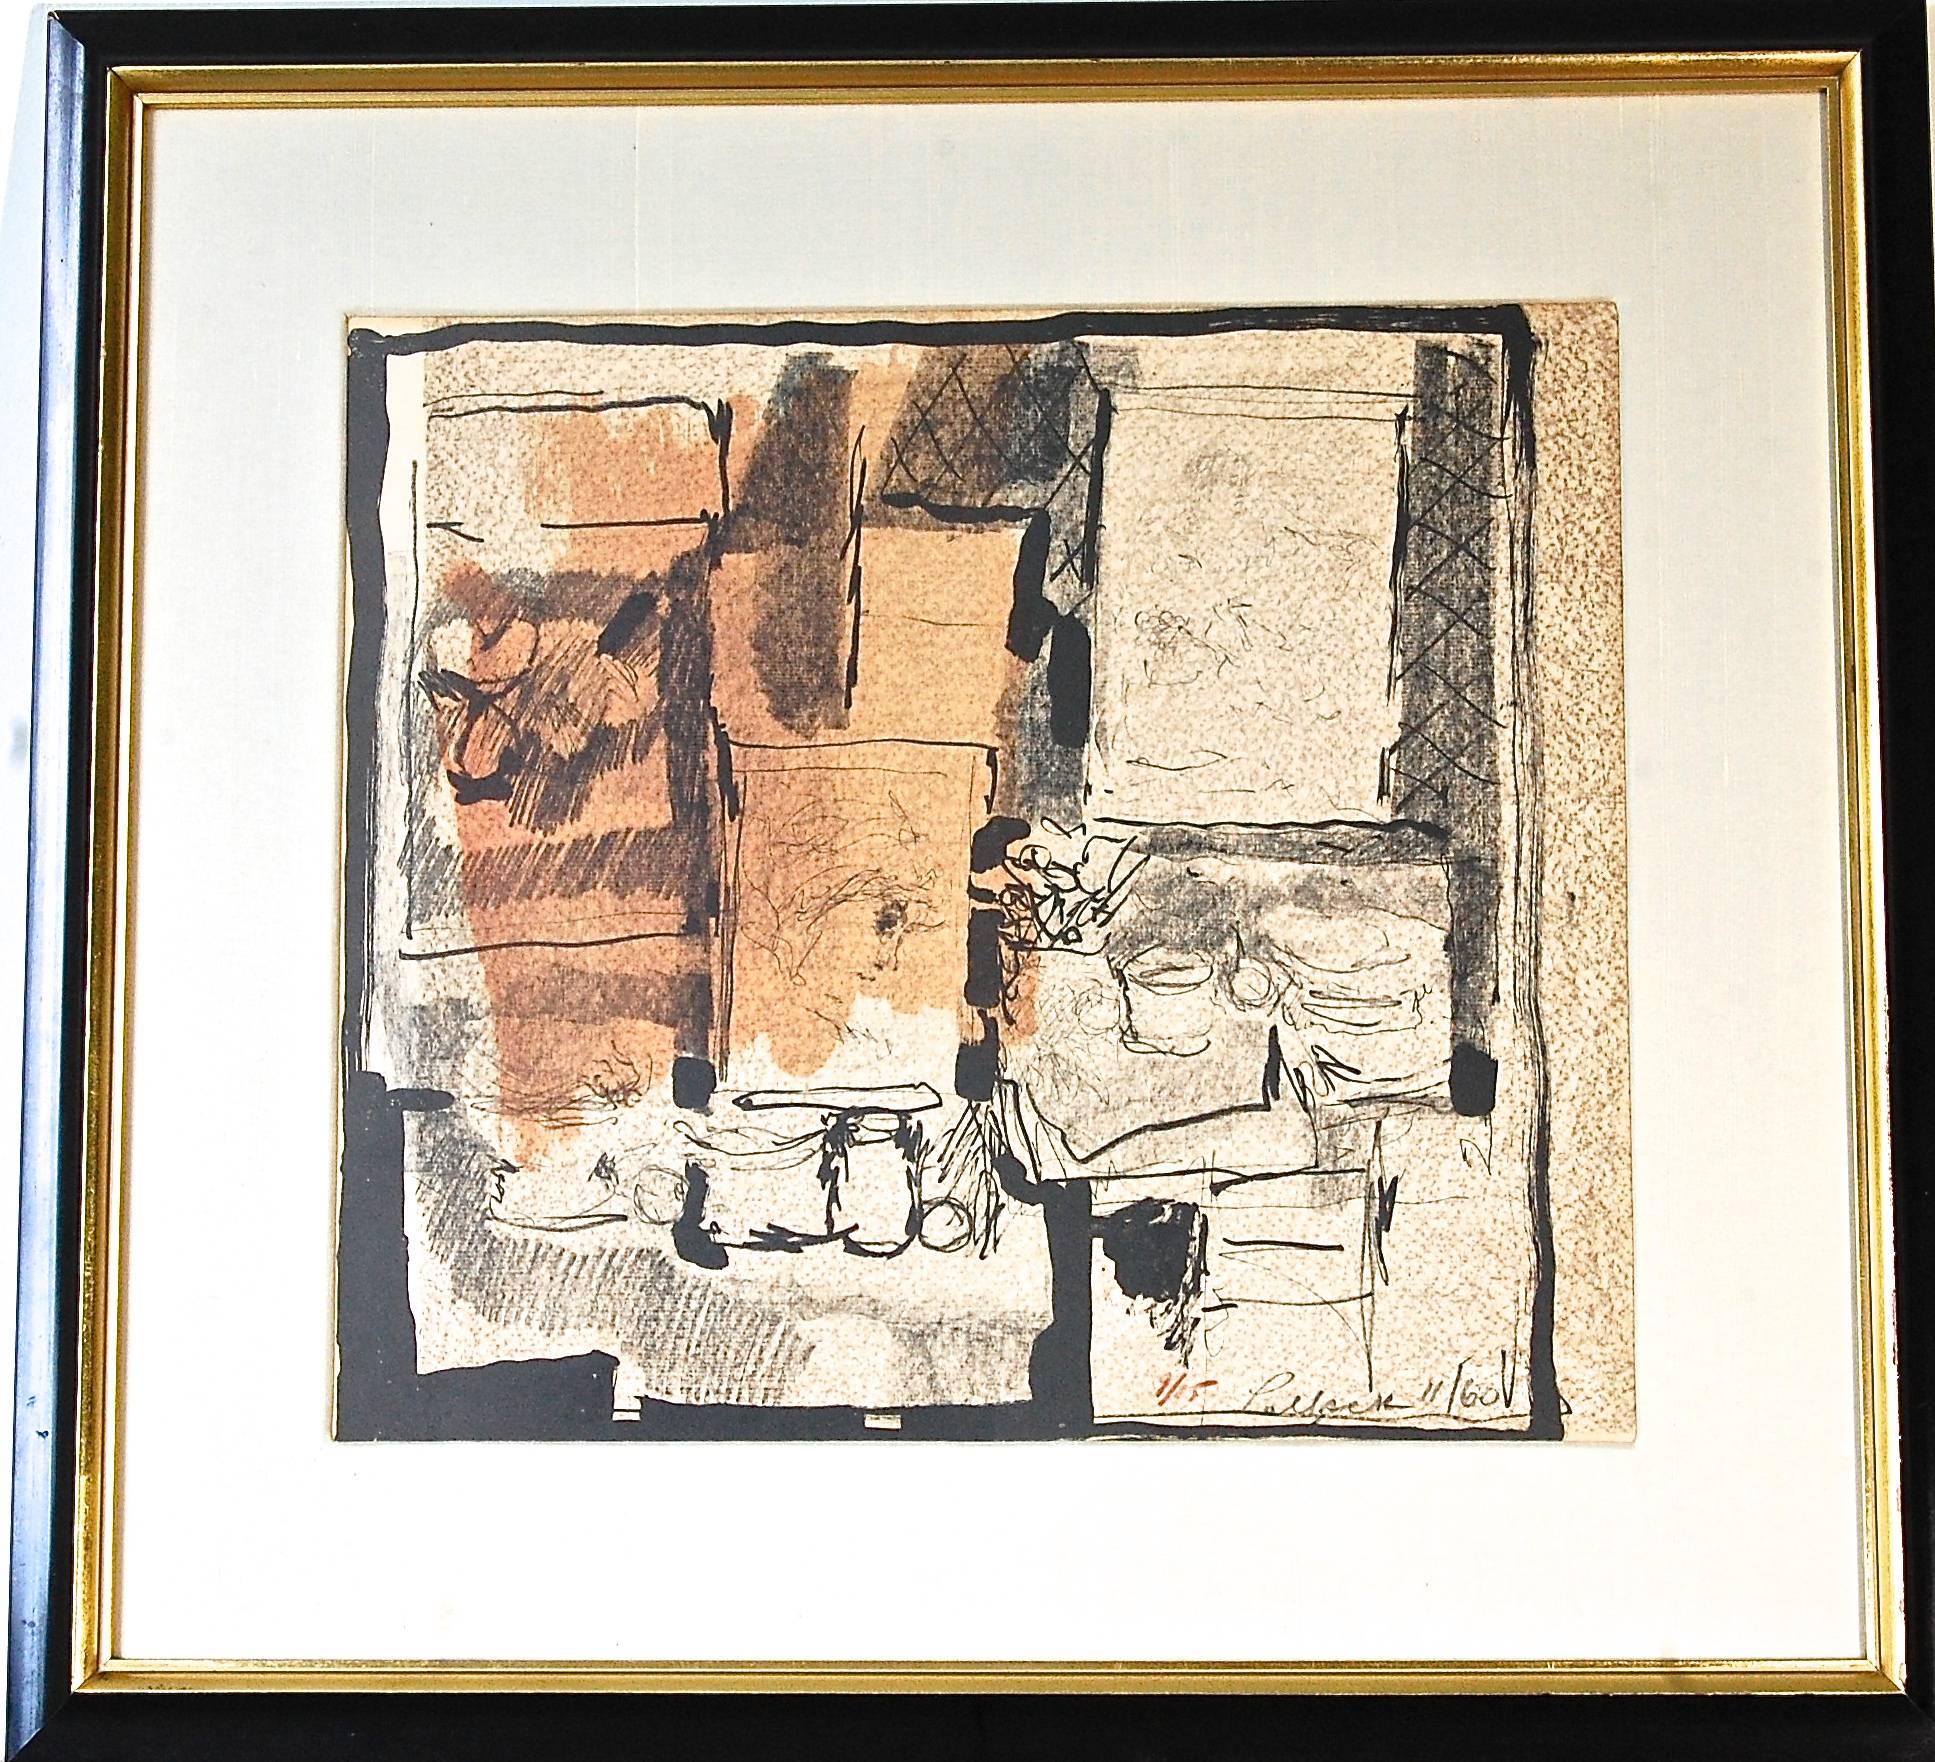  Abstract Composition Lithograph - Print by Reginald Muray Pollack